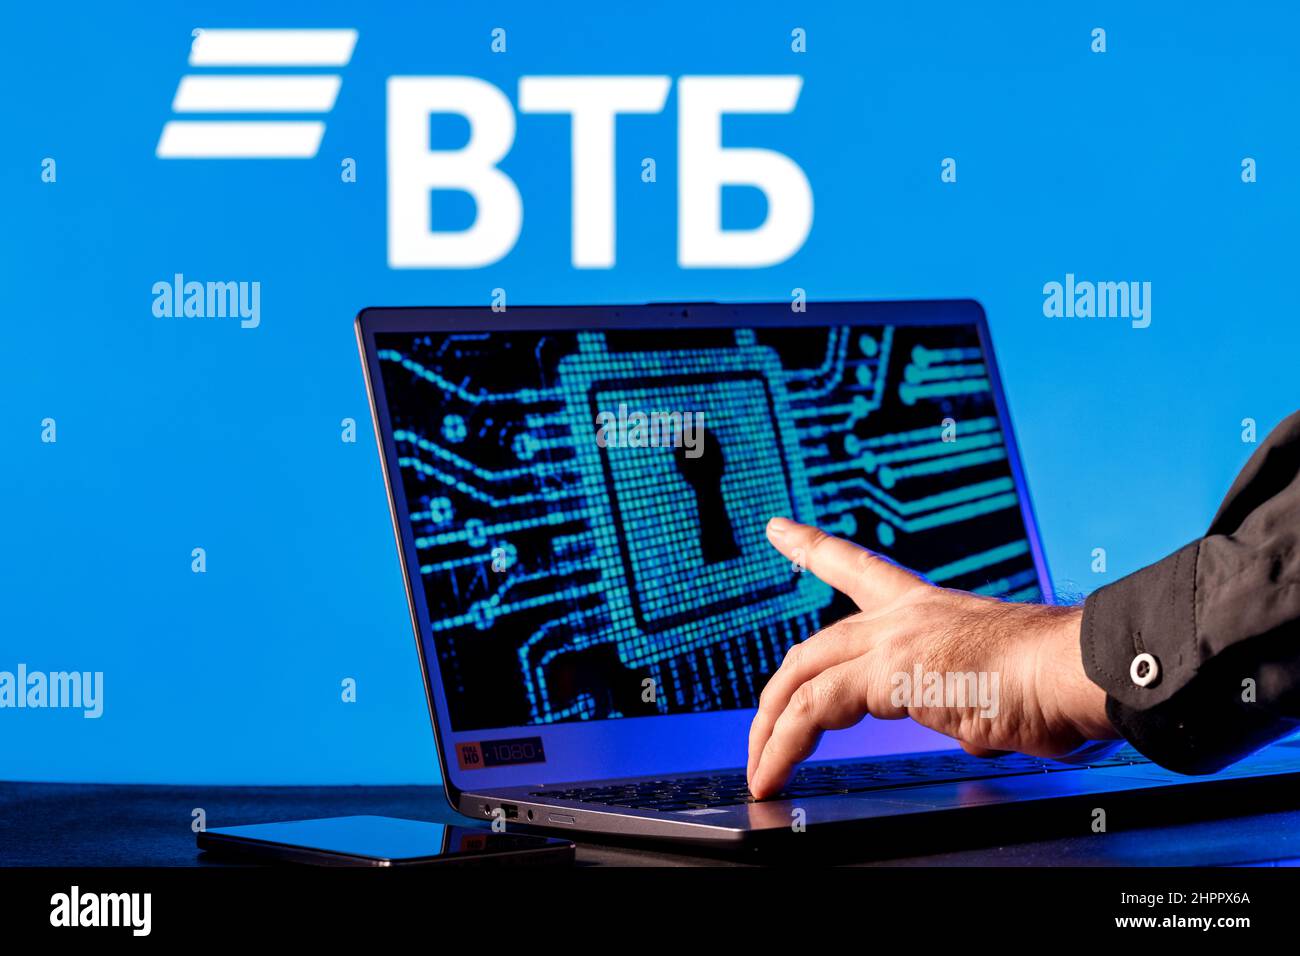 Laptop with lock symbol on screen on background of  VTB bank logo. Finger points to lock symbol. Concept of data hacking. Stock Photo